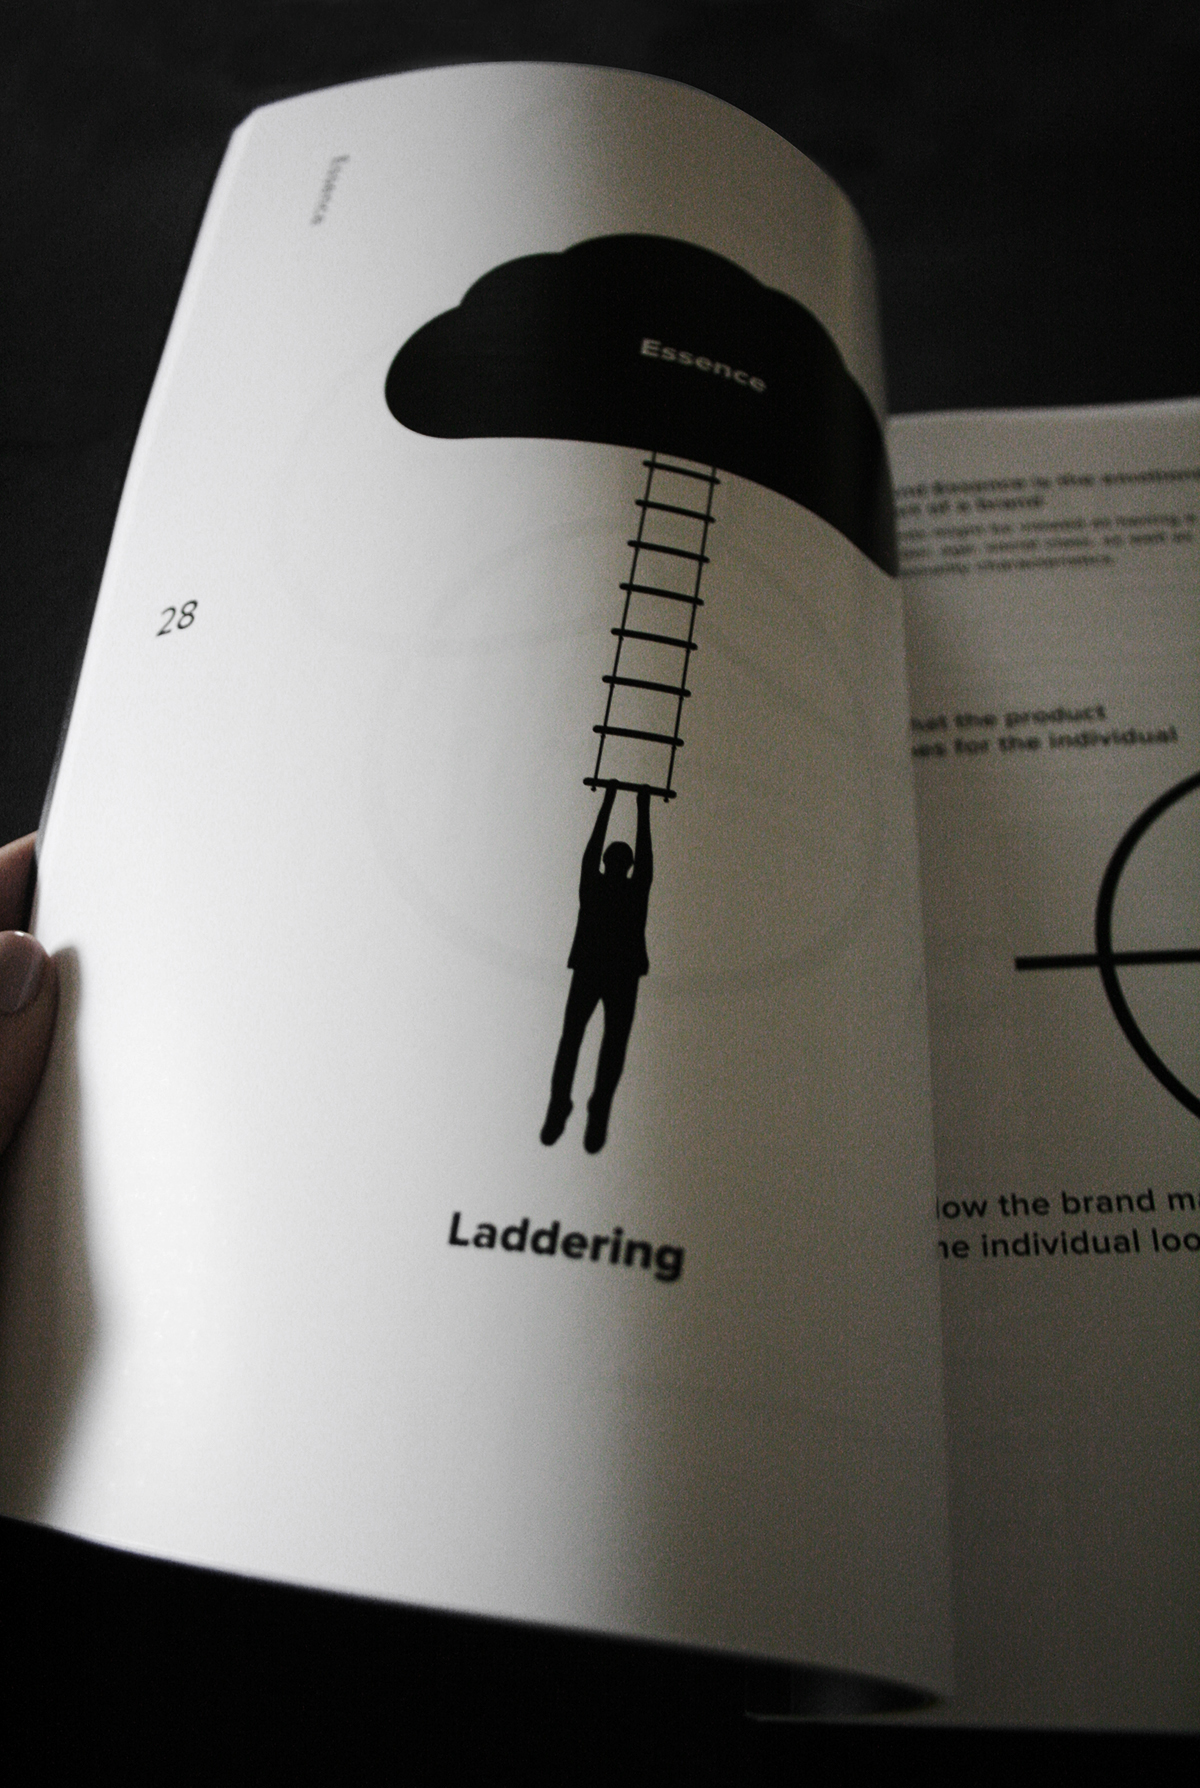 bad idea branding and design principles Book Layout Experimenting